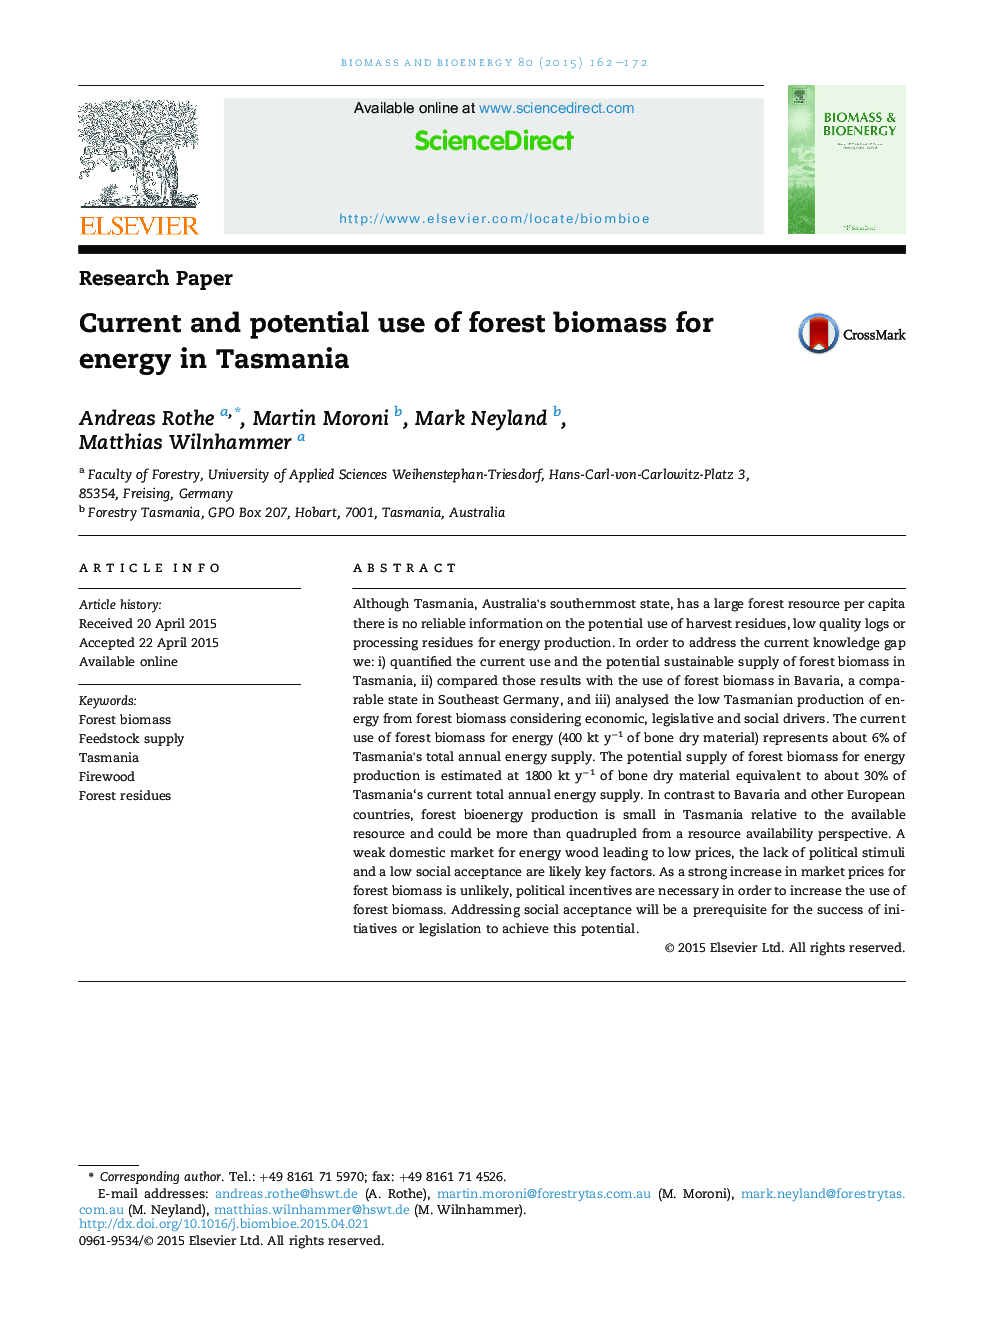 Current and potential use of forest biomass for energy in Tasmania